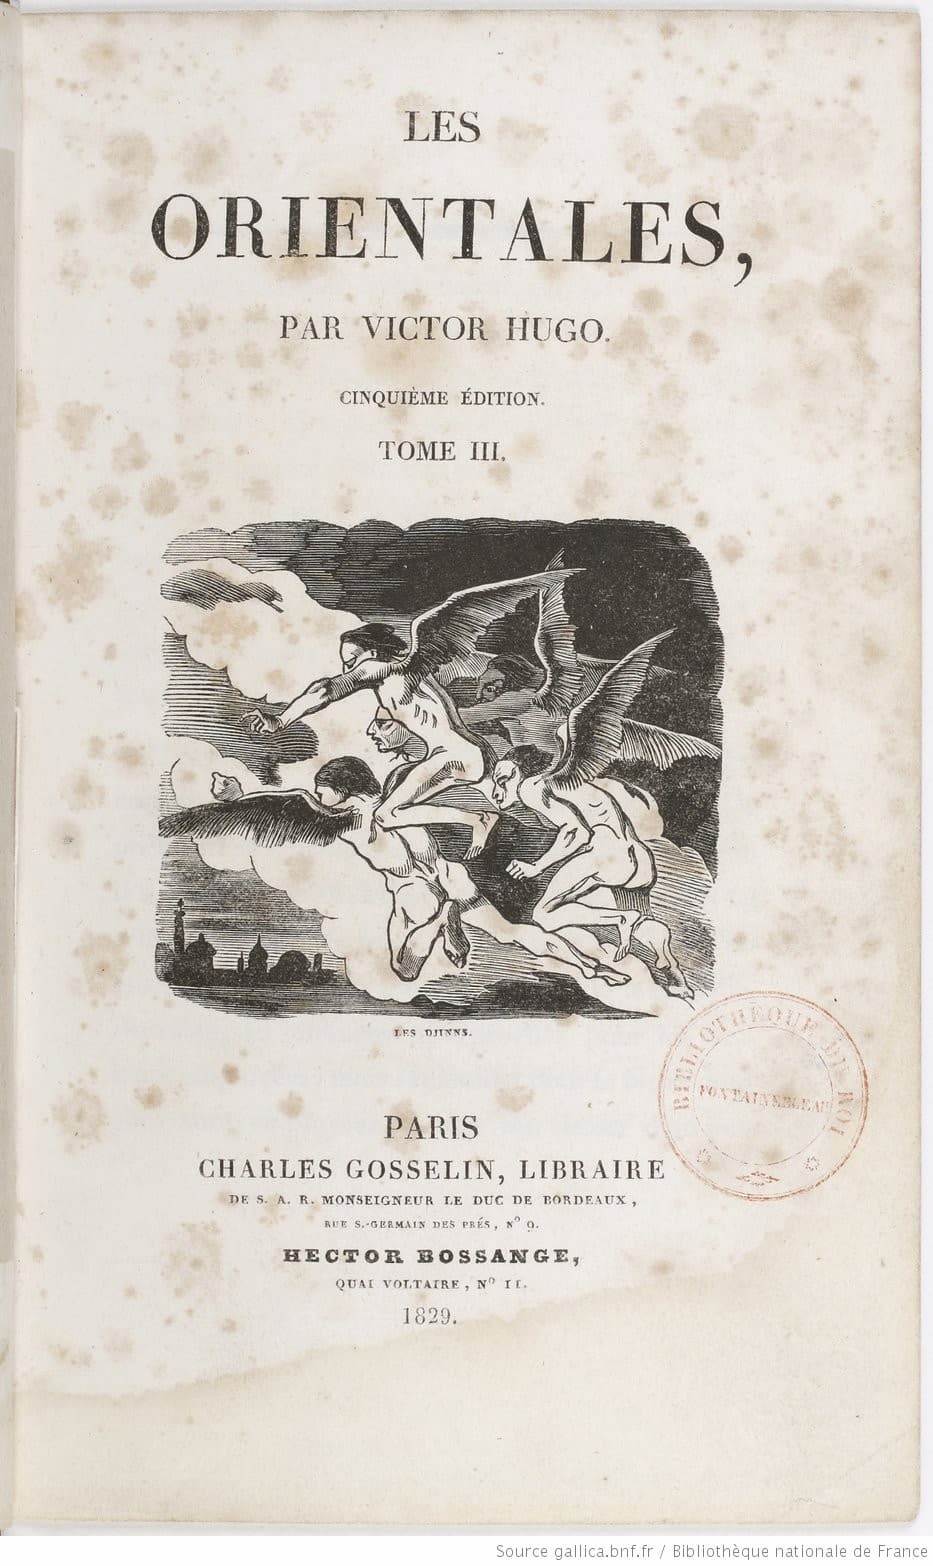 Cover of Victor Hugo's poetry collection Les Orientales